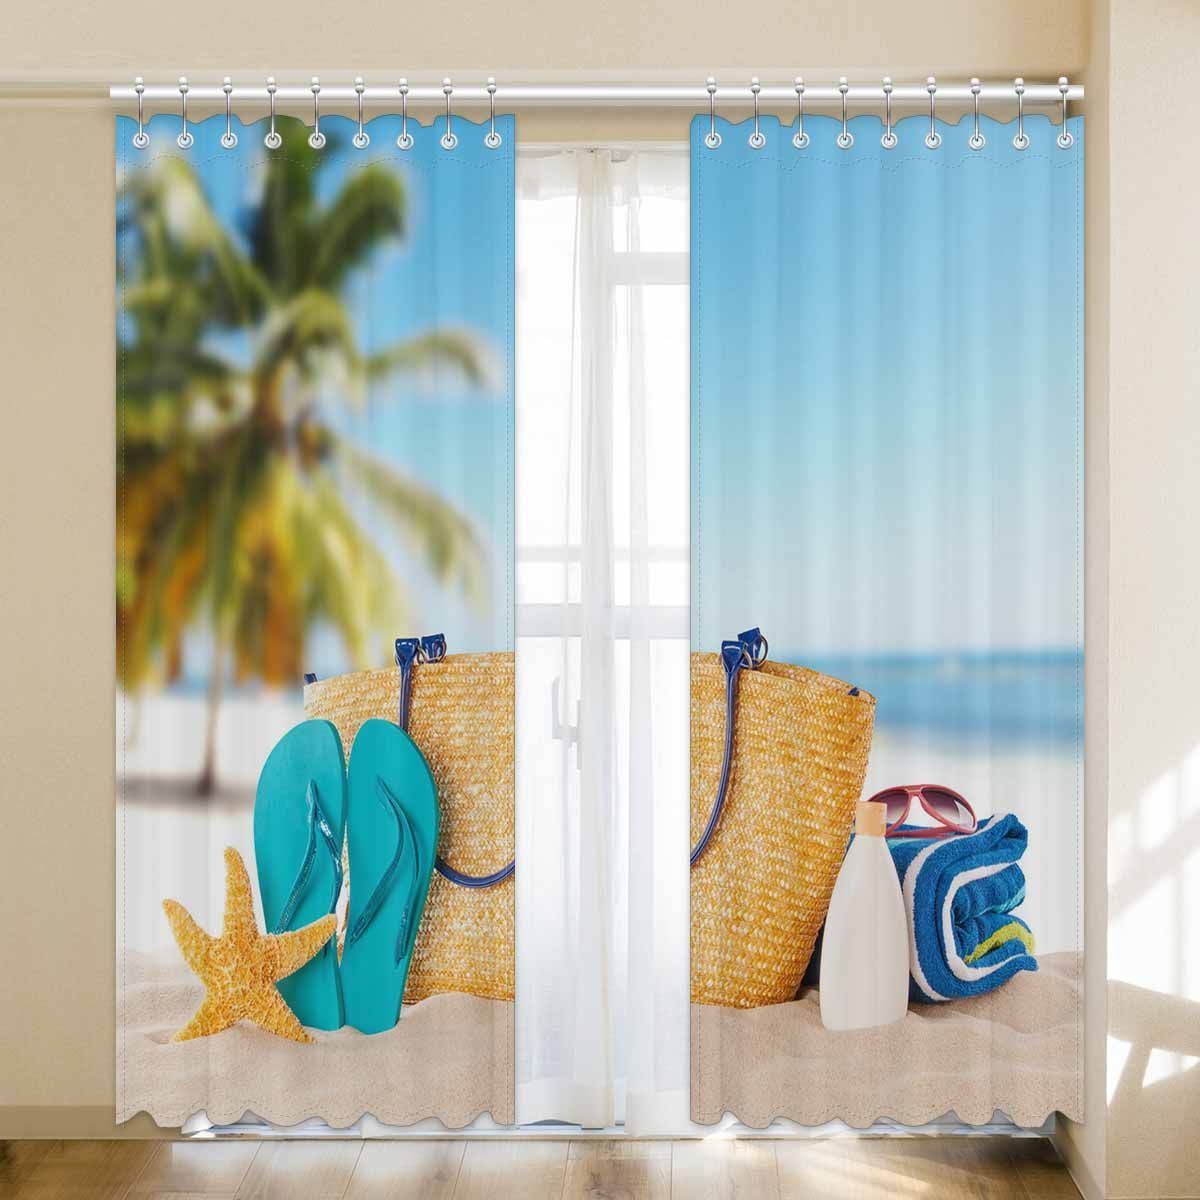 Summer Beach Themed With Blue Flip-flops And Starfish Printed Window Curtain